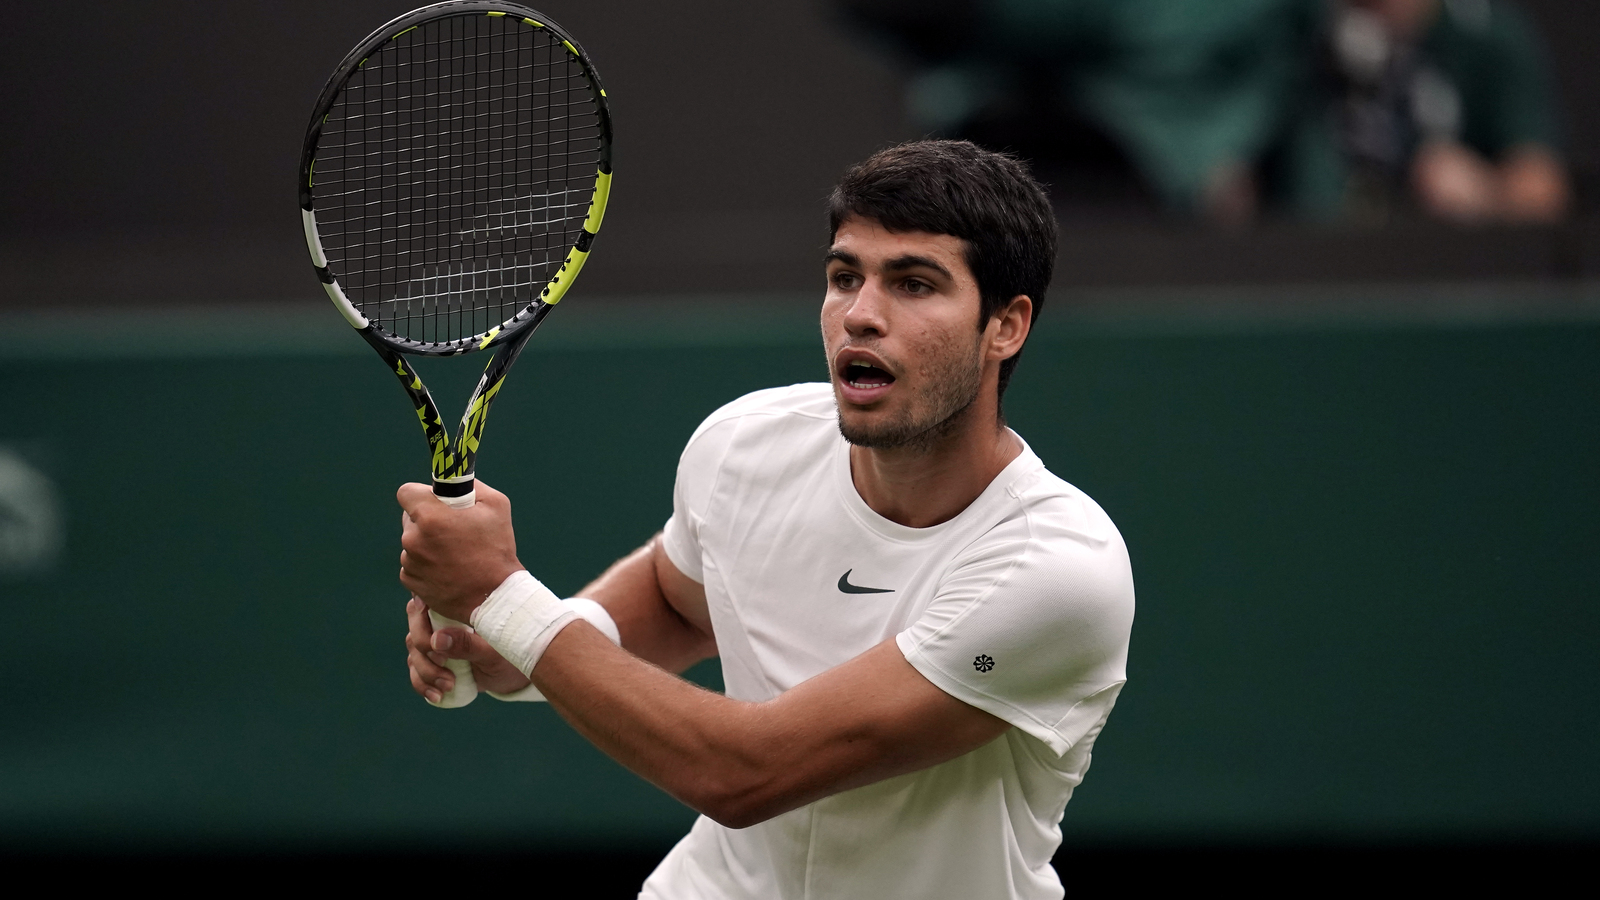 Alcaraz Sends Chardy Into Retirement With Dominant Wimbledon Showing